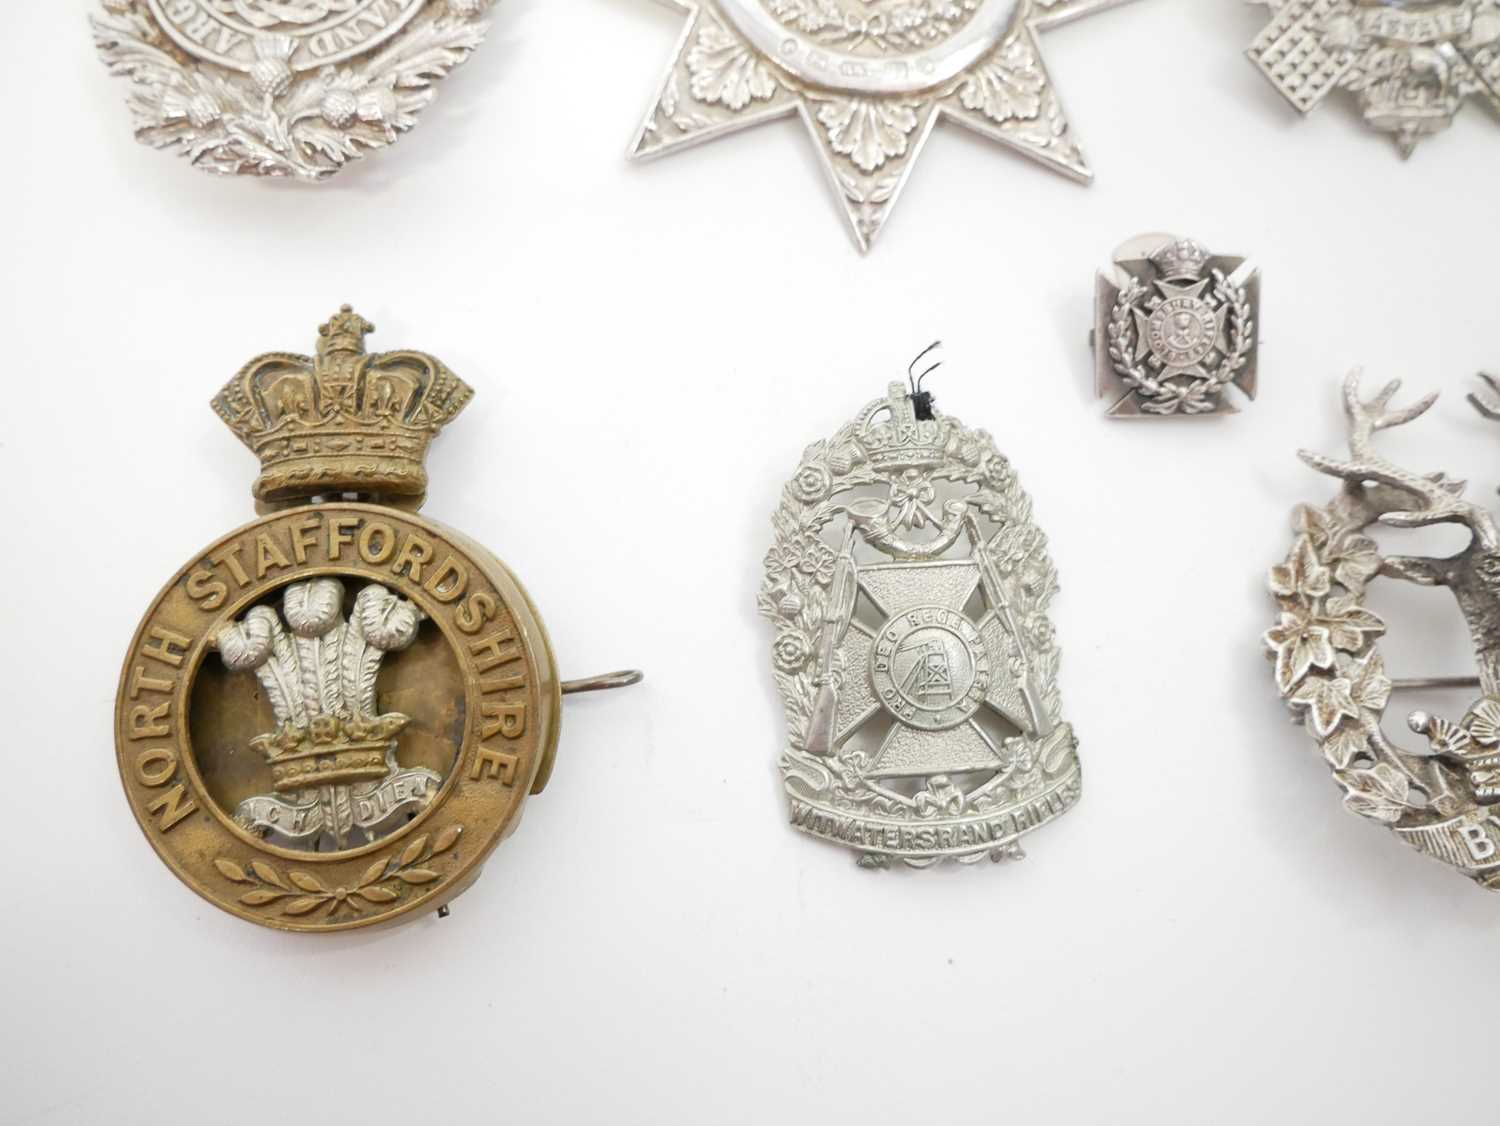 Twenty six British Army cap badges and Scottish clan badges, ten of which are Sterling silver. - Image 2 of 23